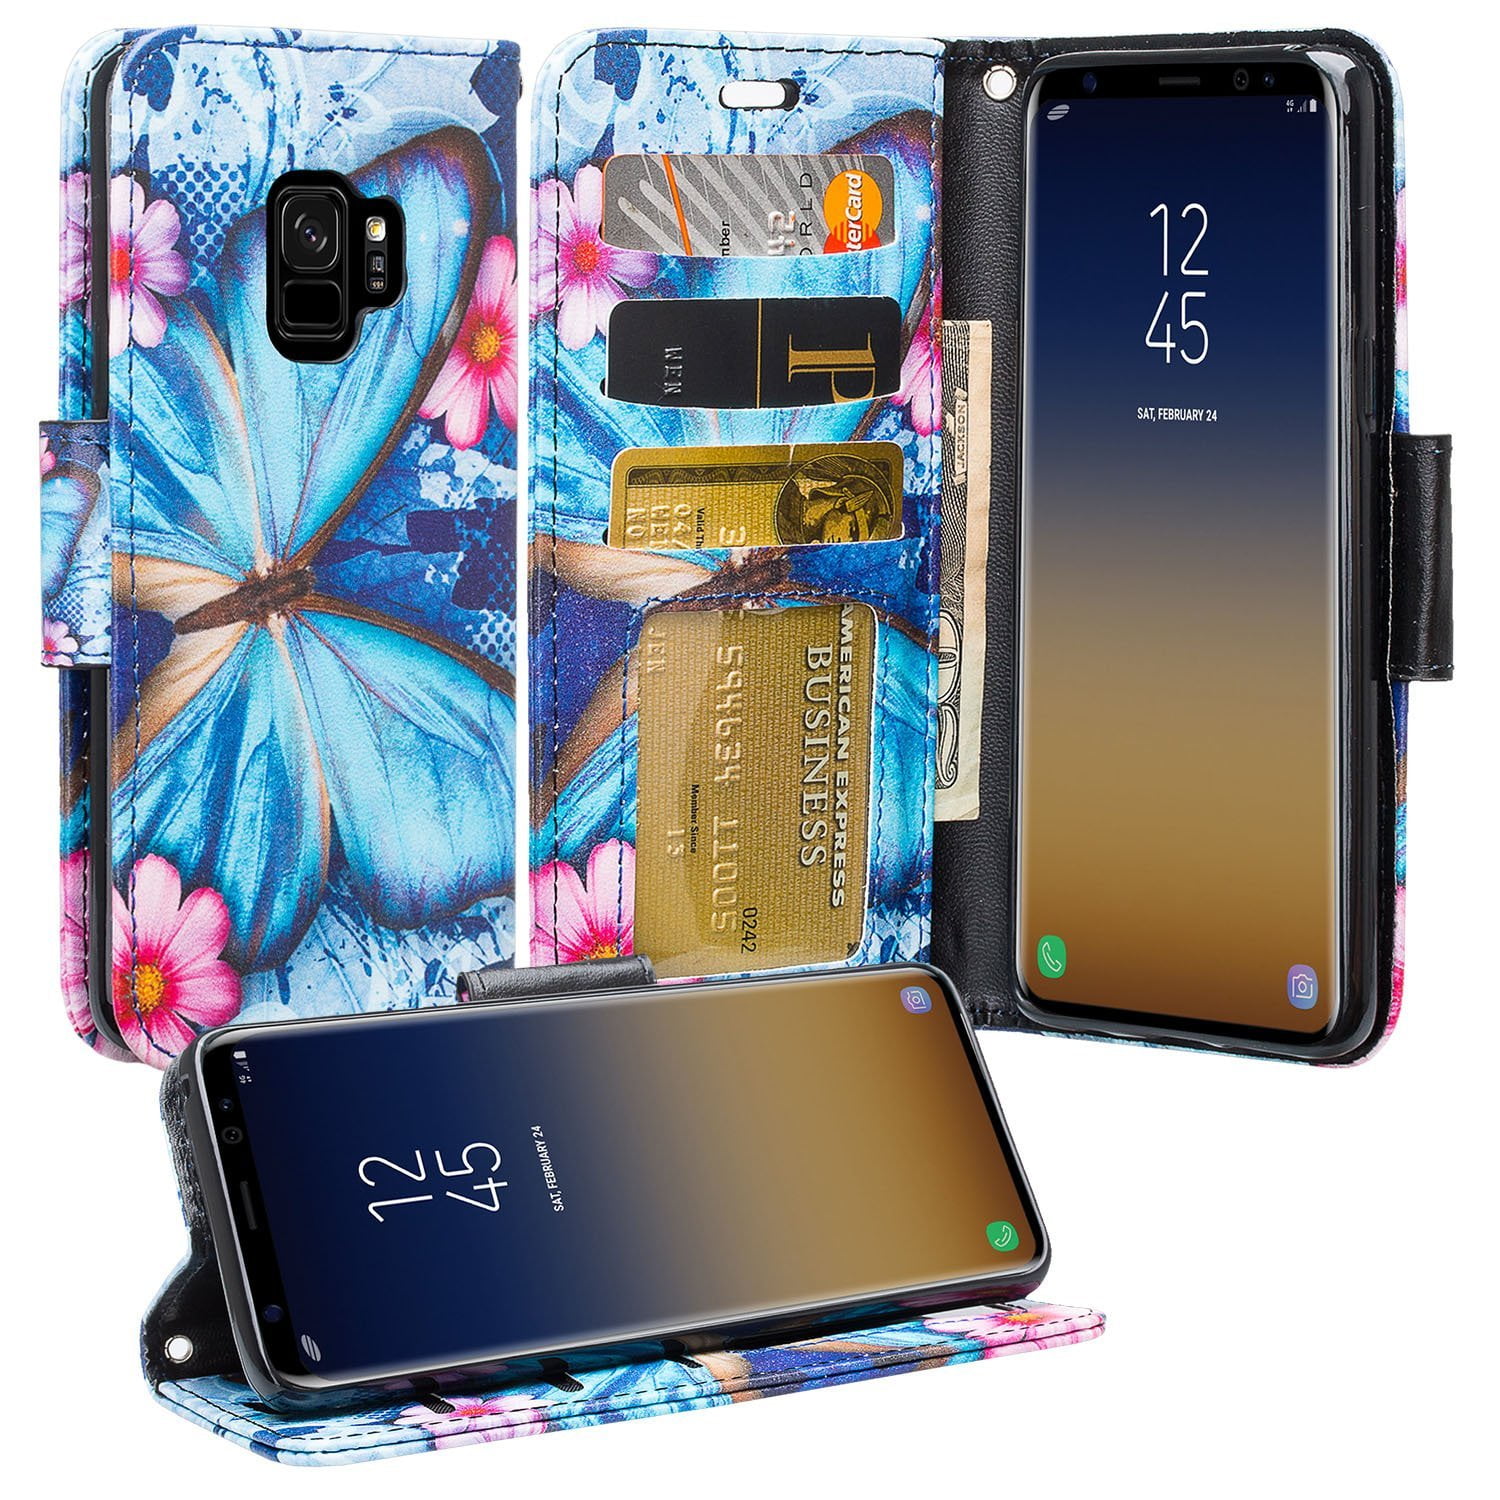 Premium Ultra Slim PU Leather Lightweight Protective Bumper Case for Galaxy S9 